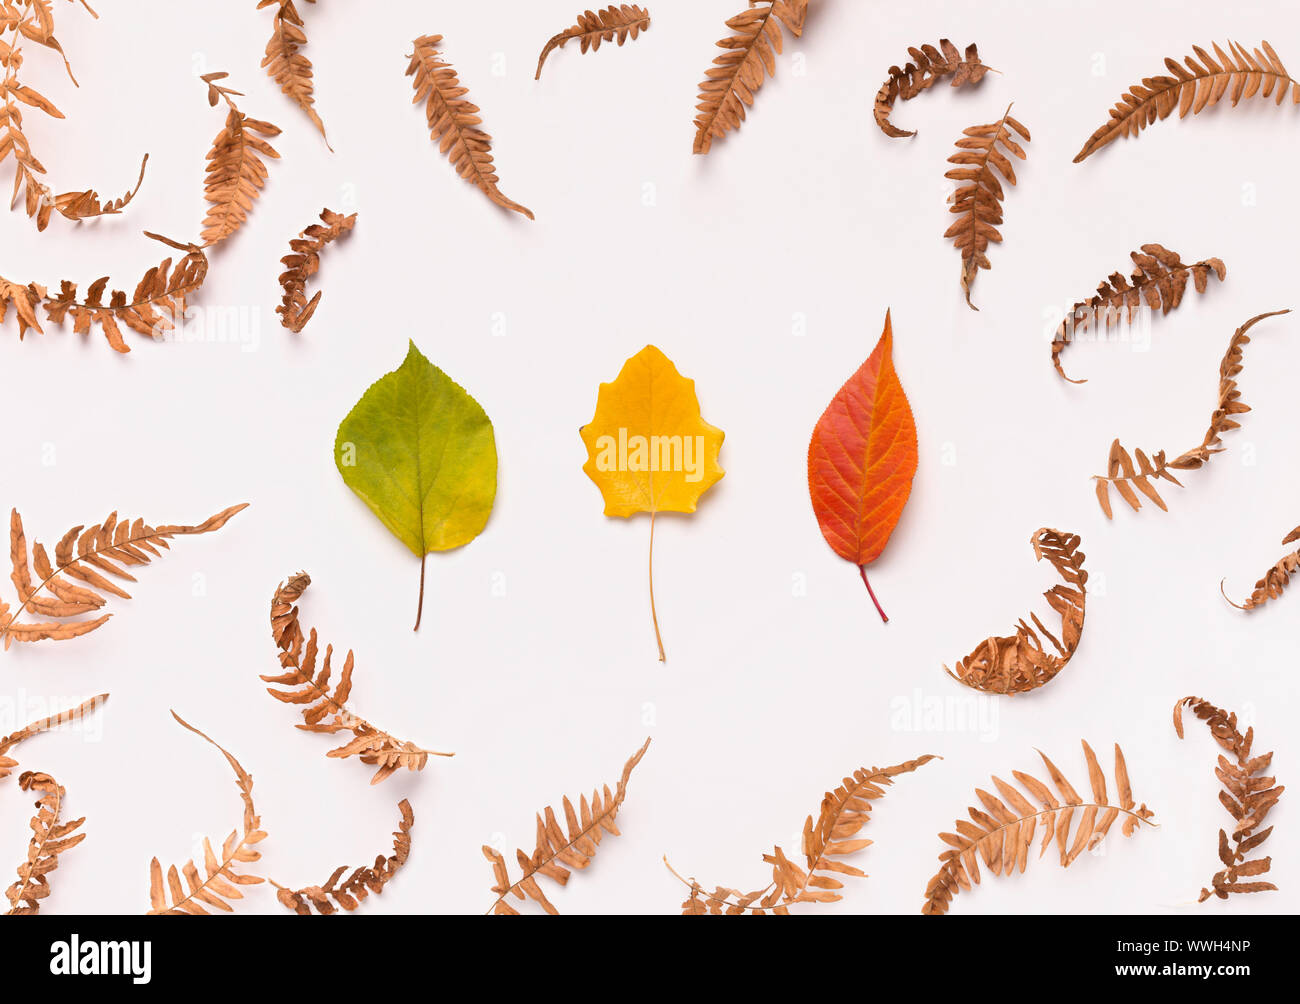 Three different colored fallen autumn leaves on white Stock Photo